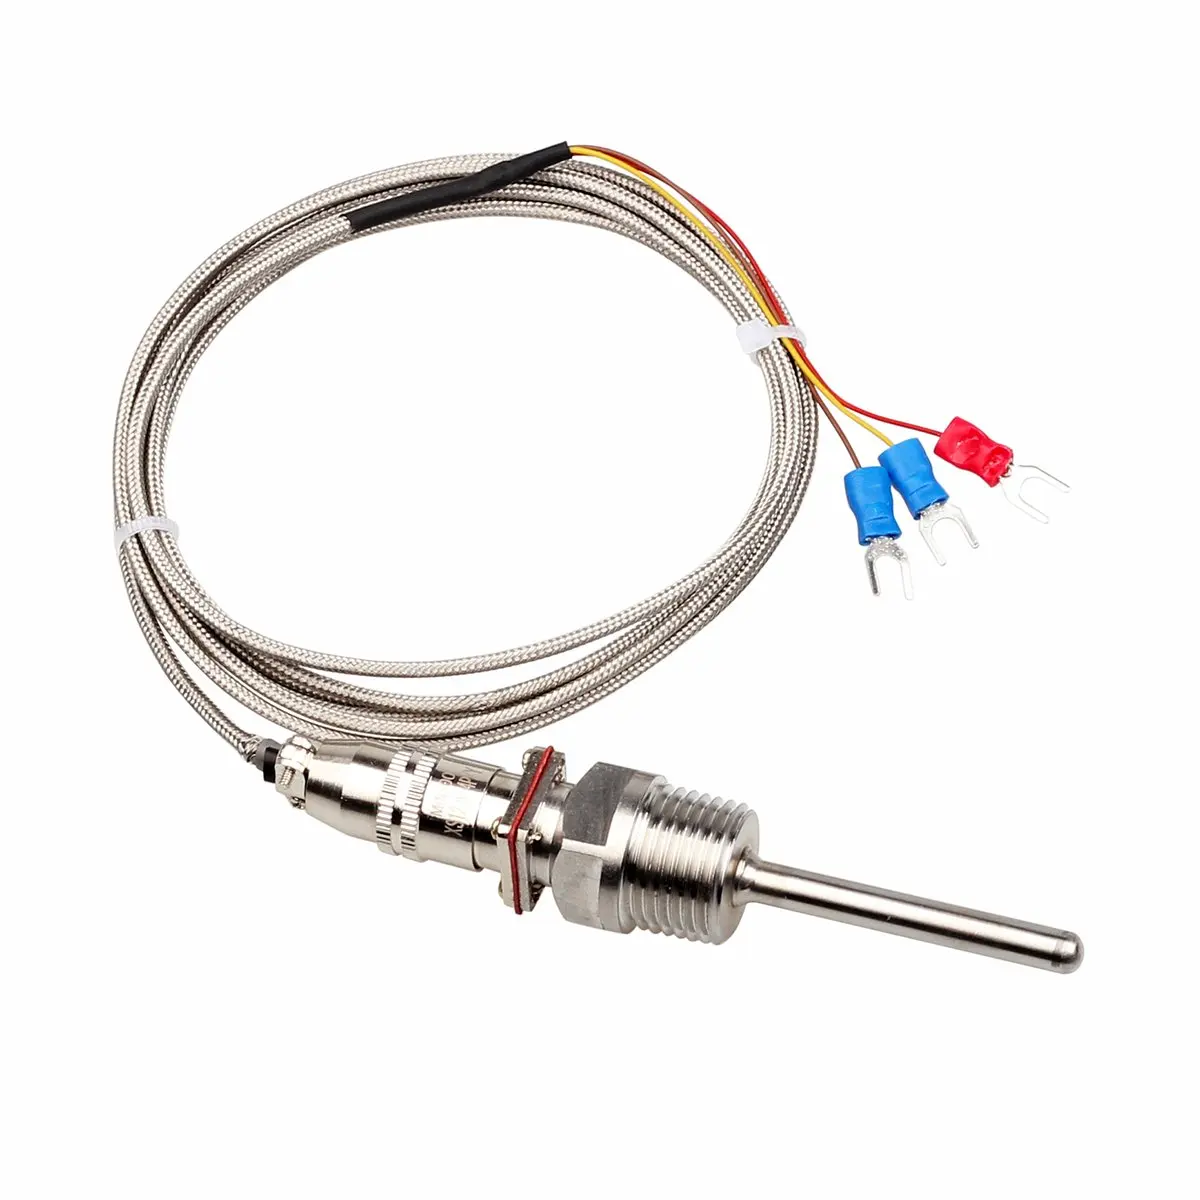 RTD PT100 Stainless Steel Temperature Sensor Thermocouple with 2m 3 Cable Wires 